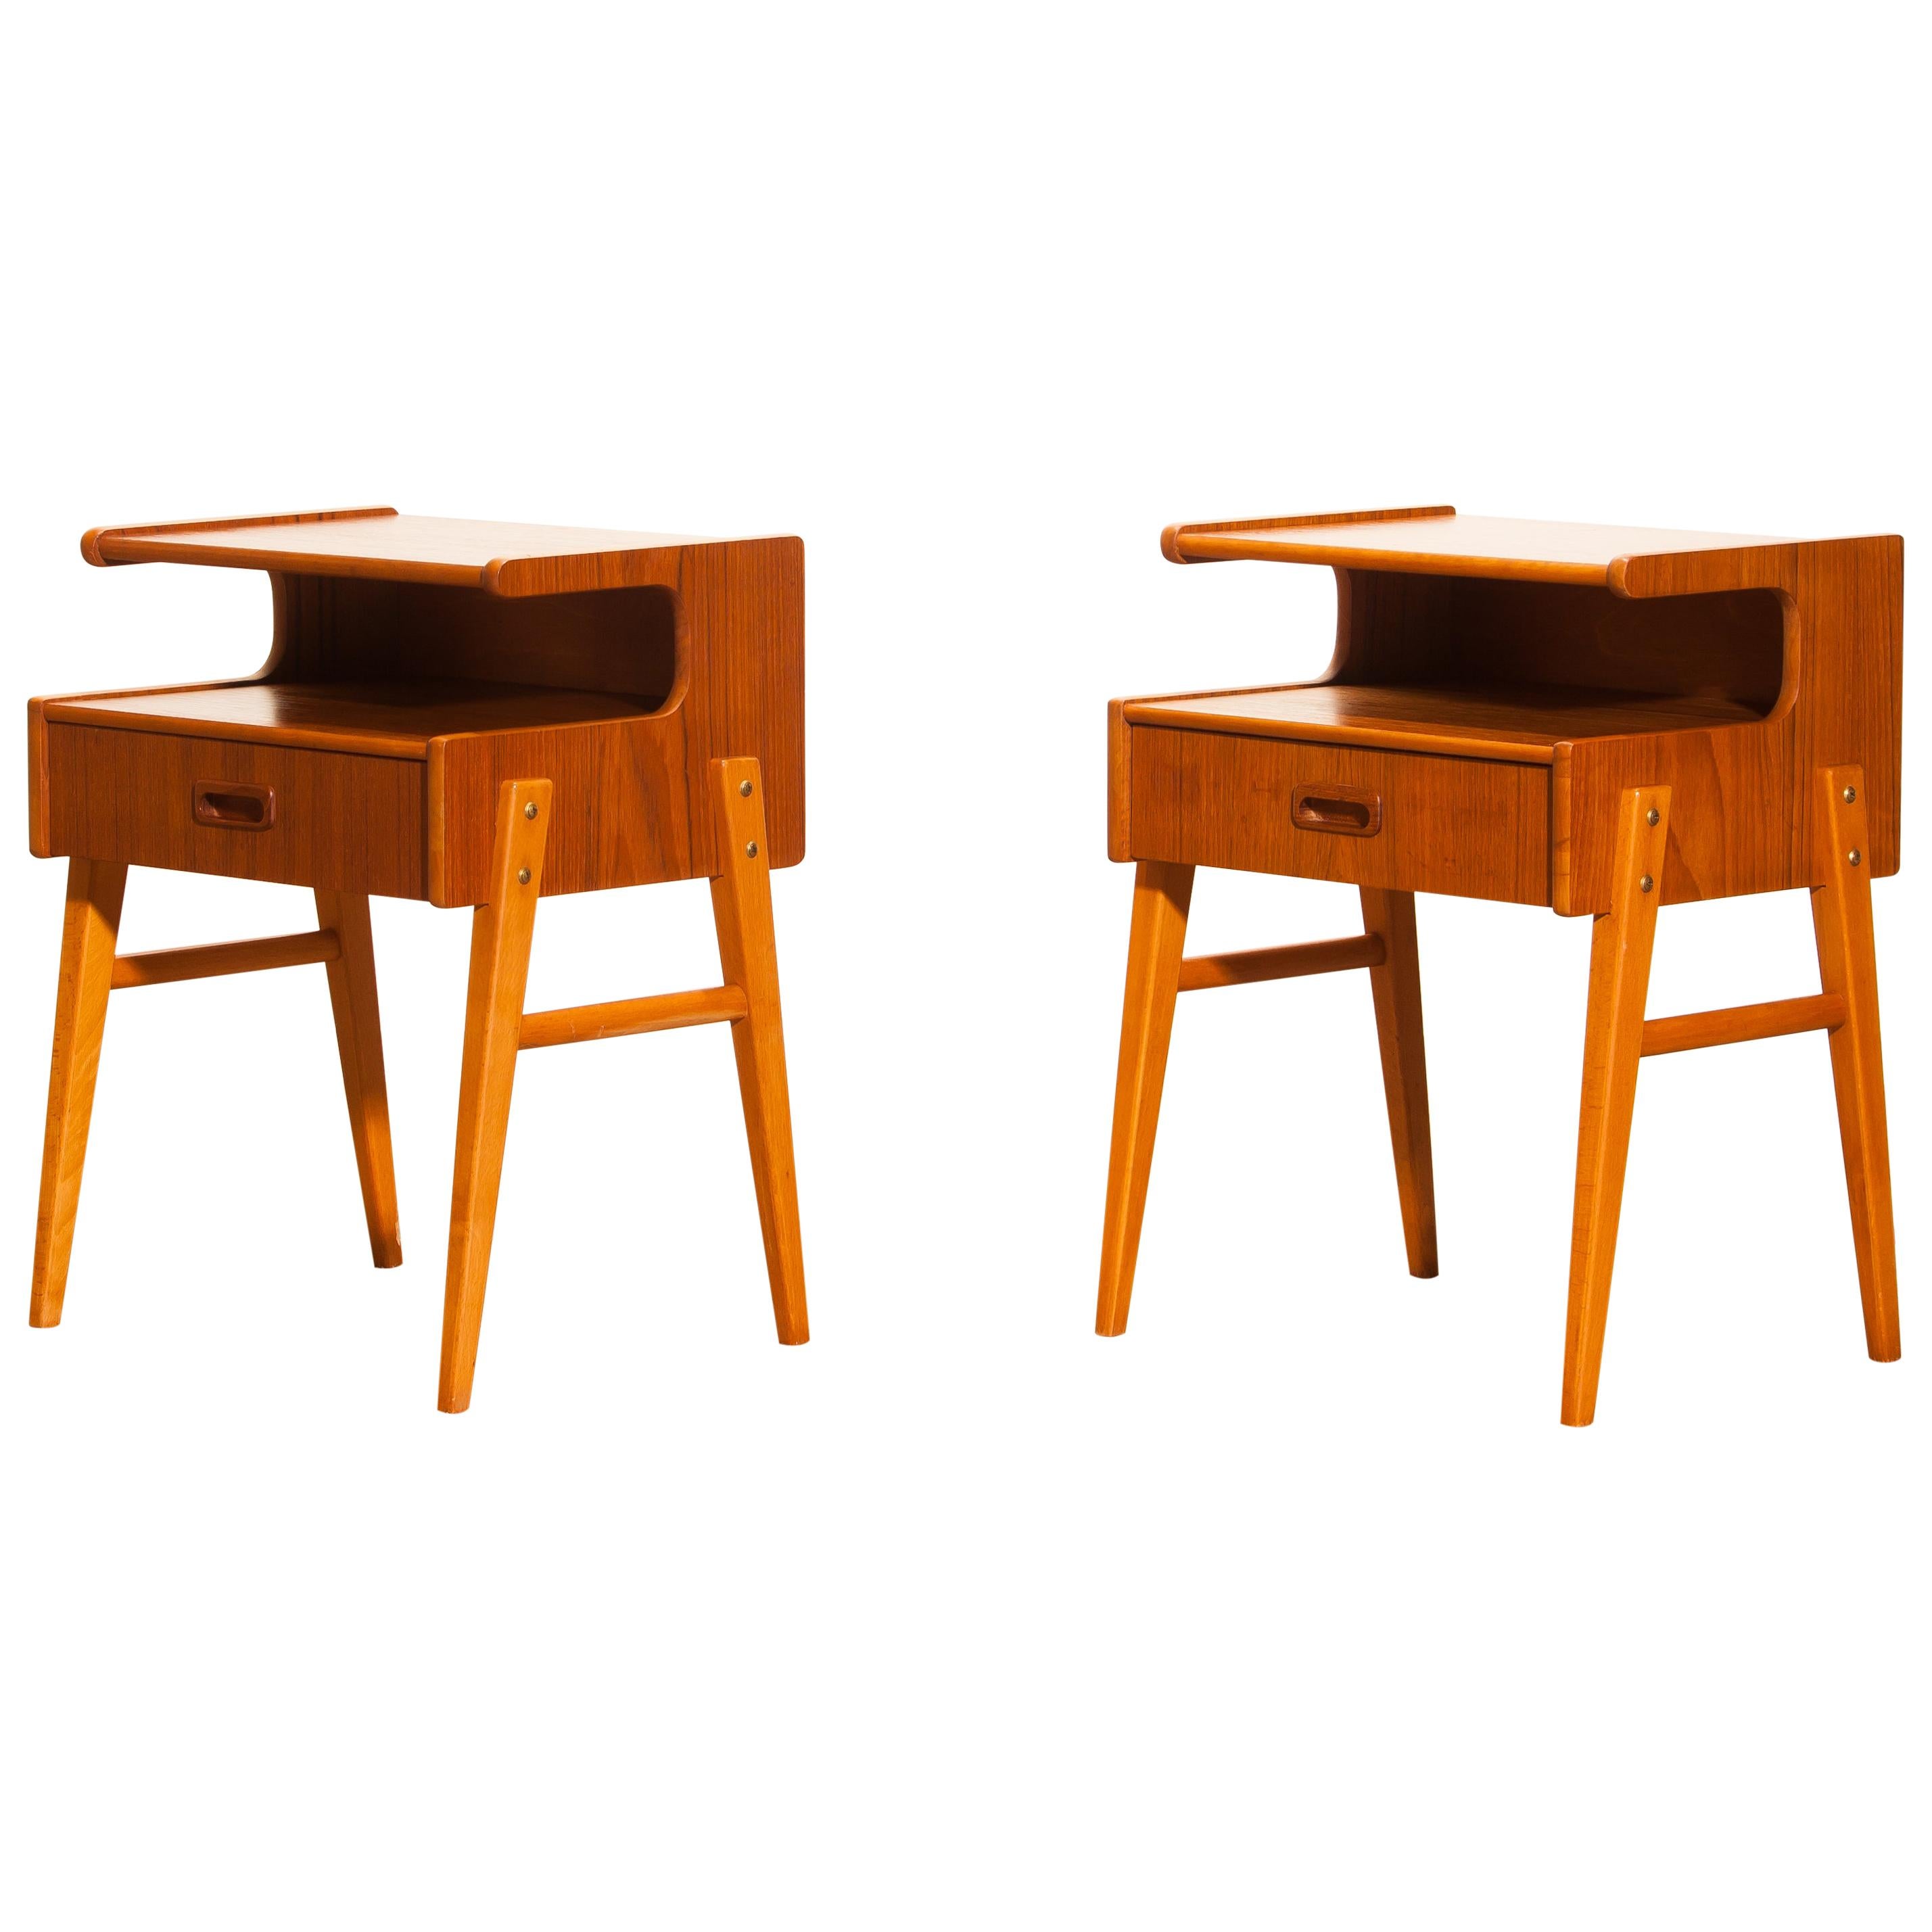 A pair of two lovely bedside tables in beautiful ‘C’ shape.
These tables are made of teak.
Each table has a drawer.
They are in very nice condition.
Period: 1950s.
Dimensions: H 54 cm, W 40 cm, D 33 cm.